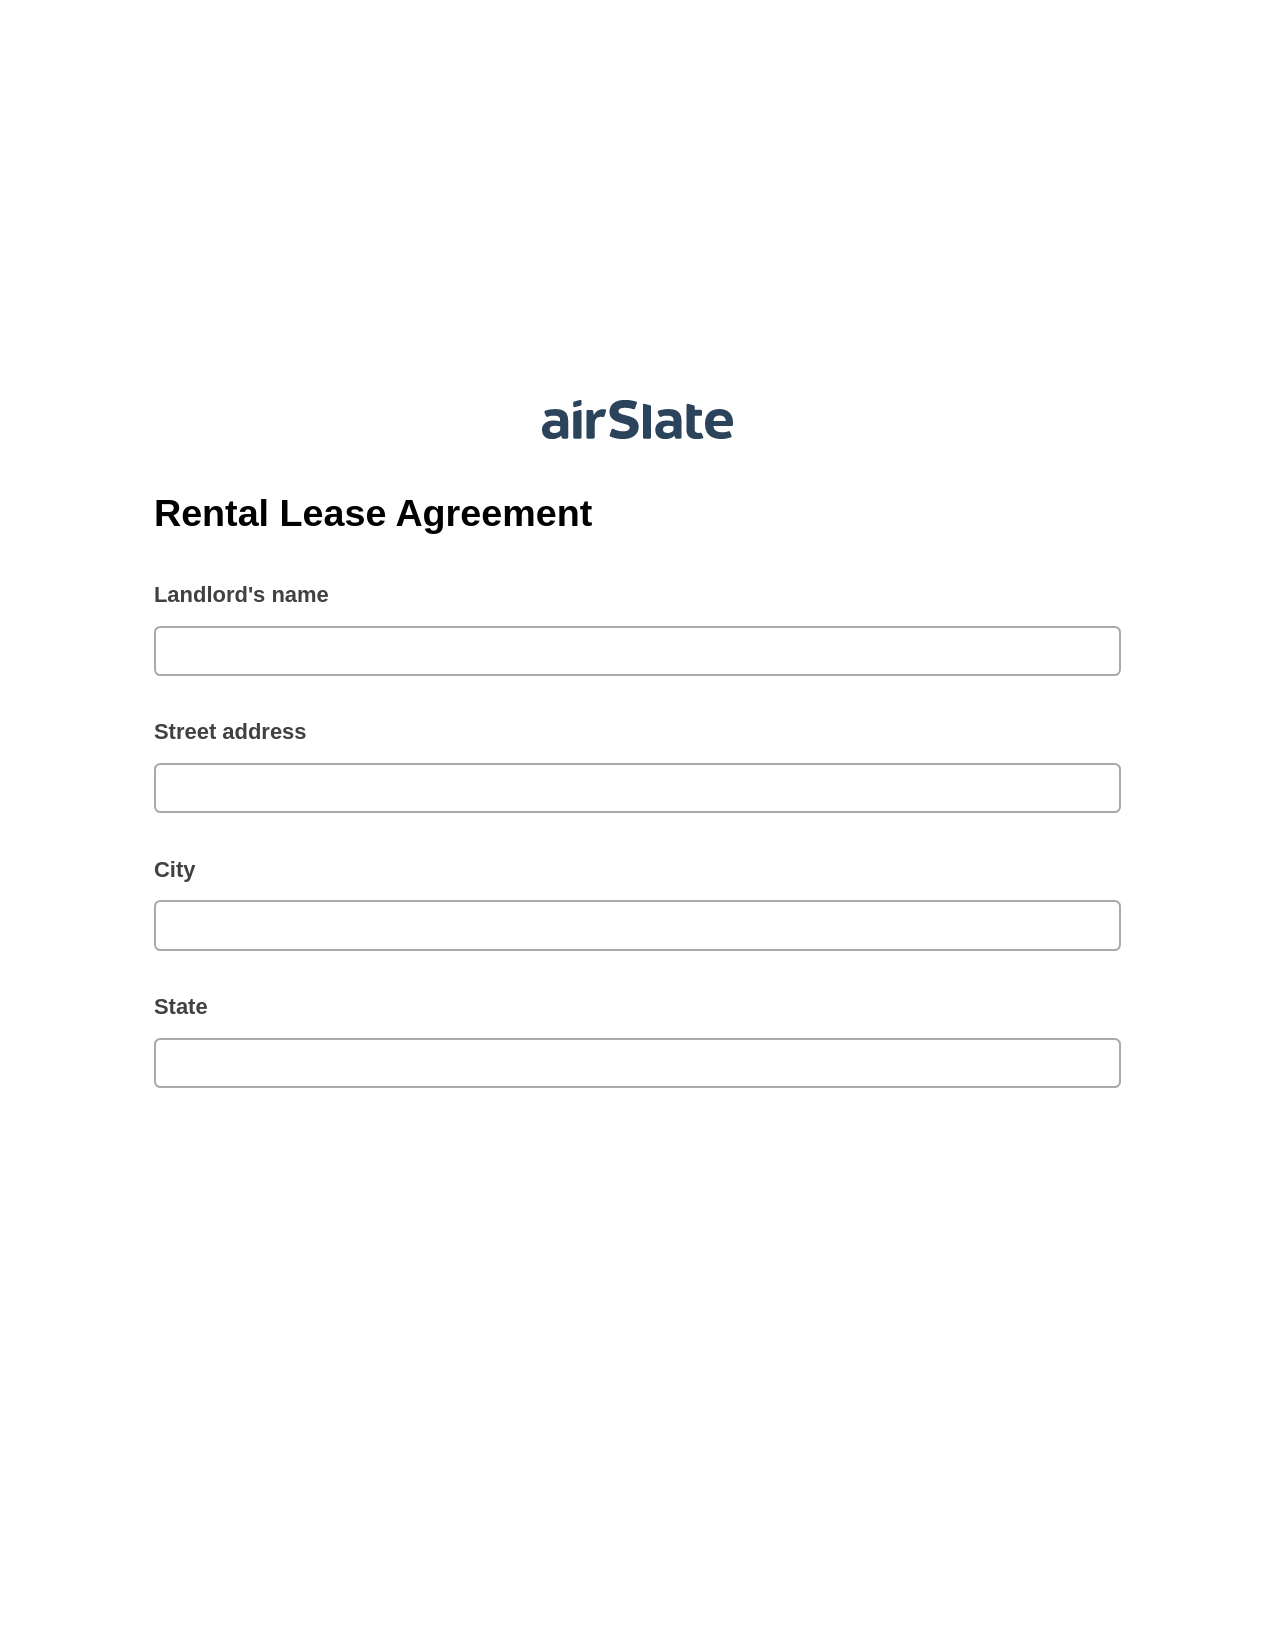 Rental Lease Agreement Pre-fill from MySQL Dropdown Options Bot, System Bot - Create a Slate in another Flow, Export to Salesforce Bot